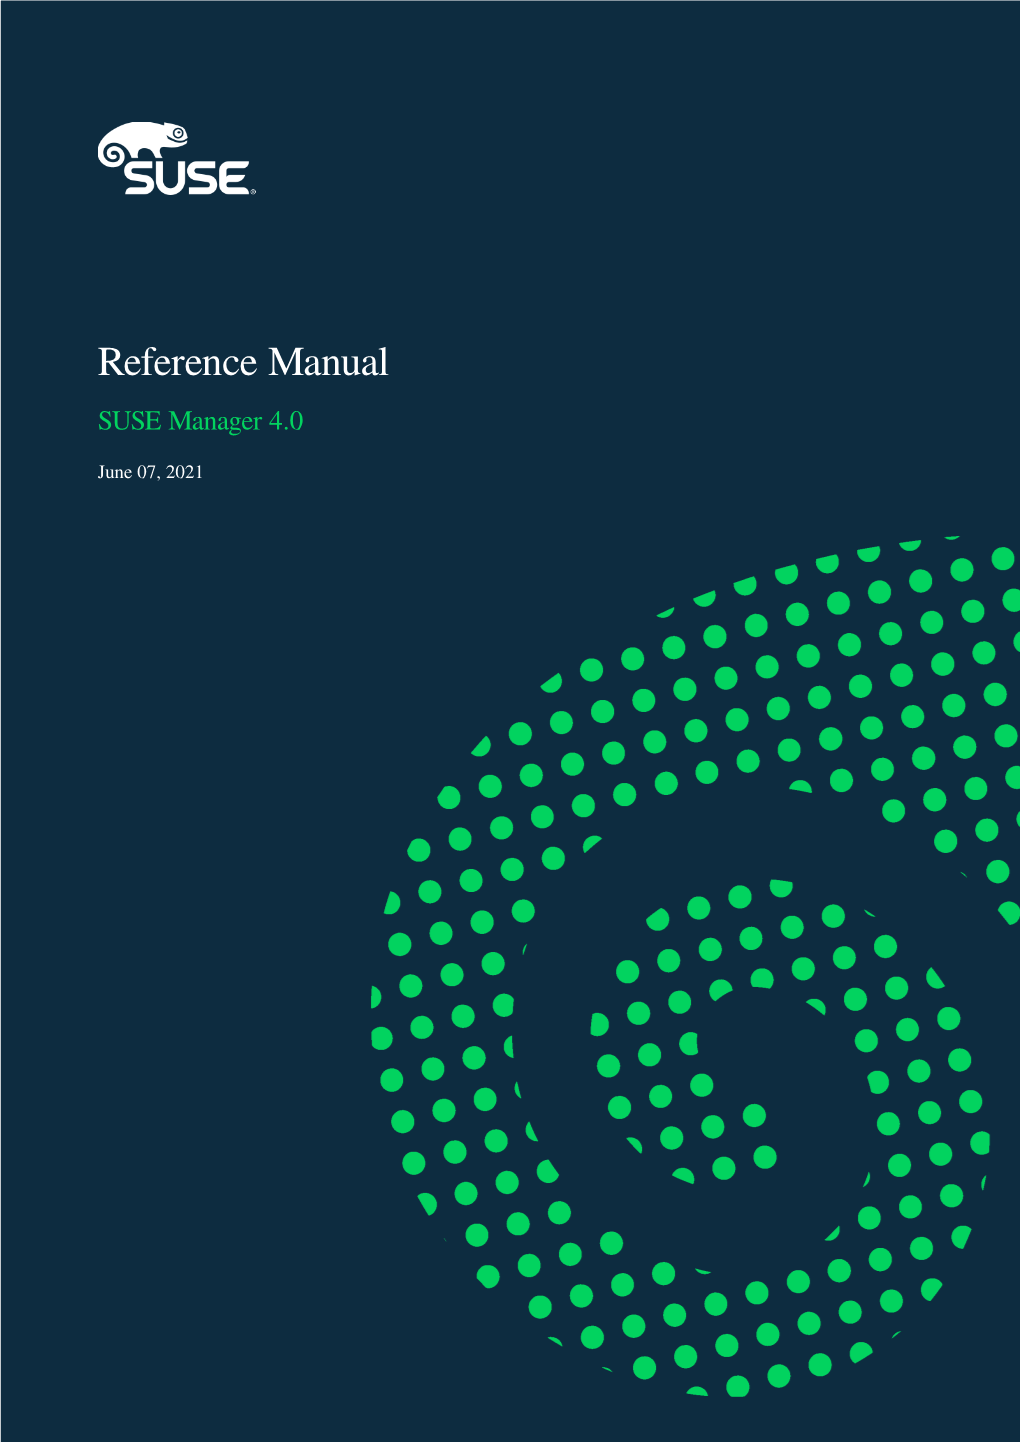 Reference Manual: SUSE Manager